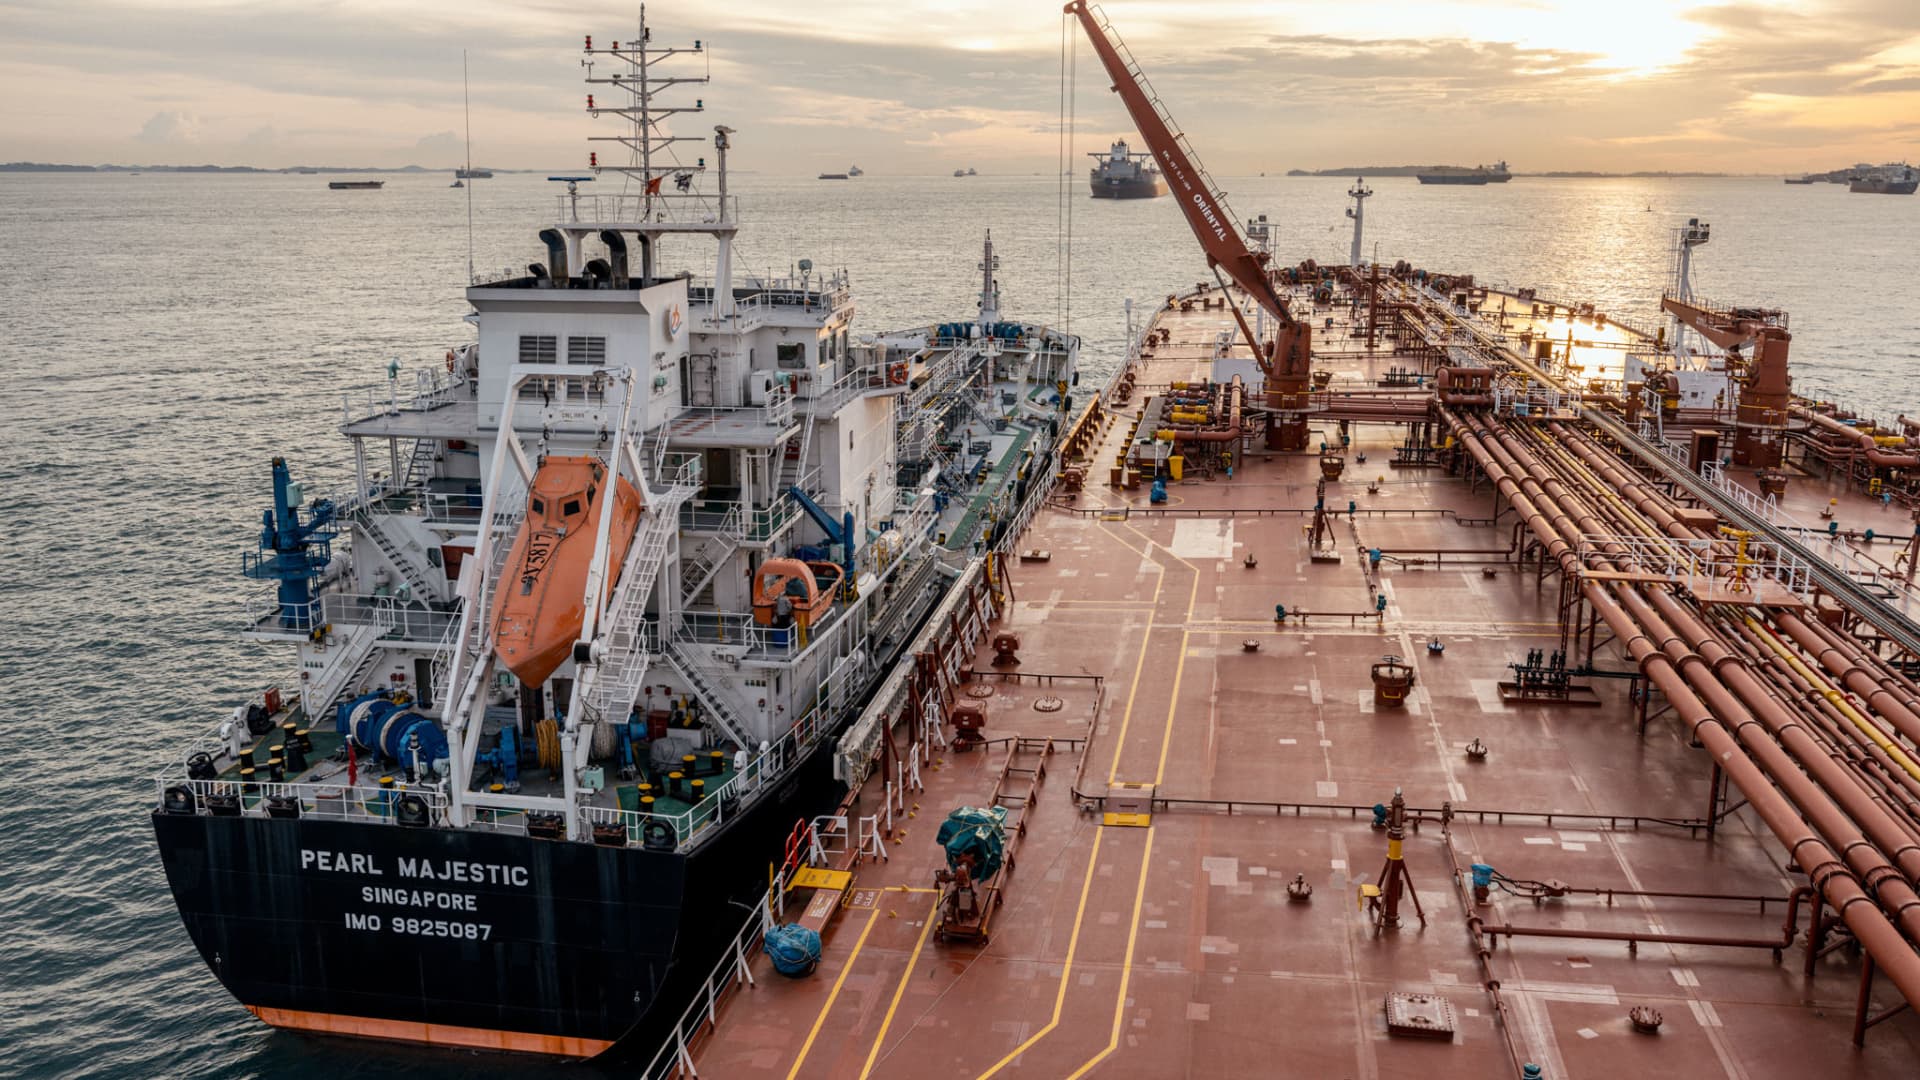 An oil tanker being serviced by a bunkering vessel.